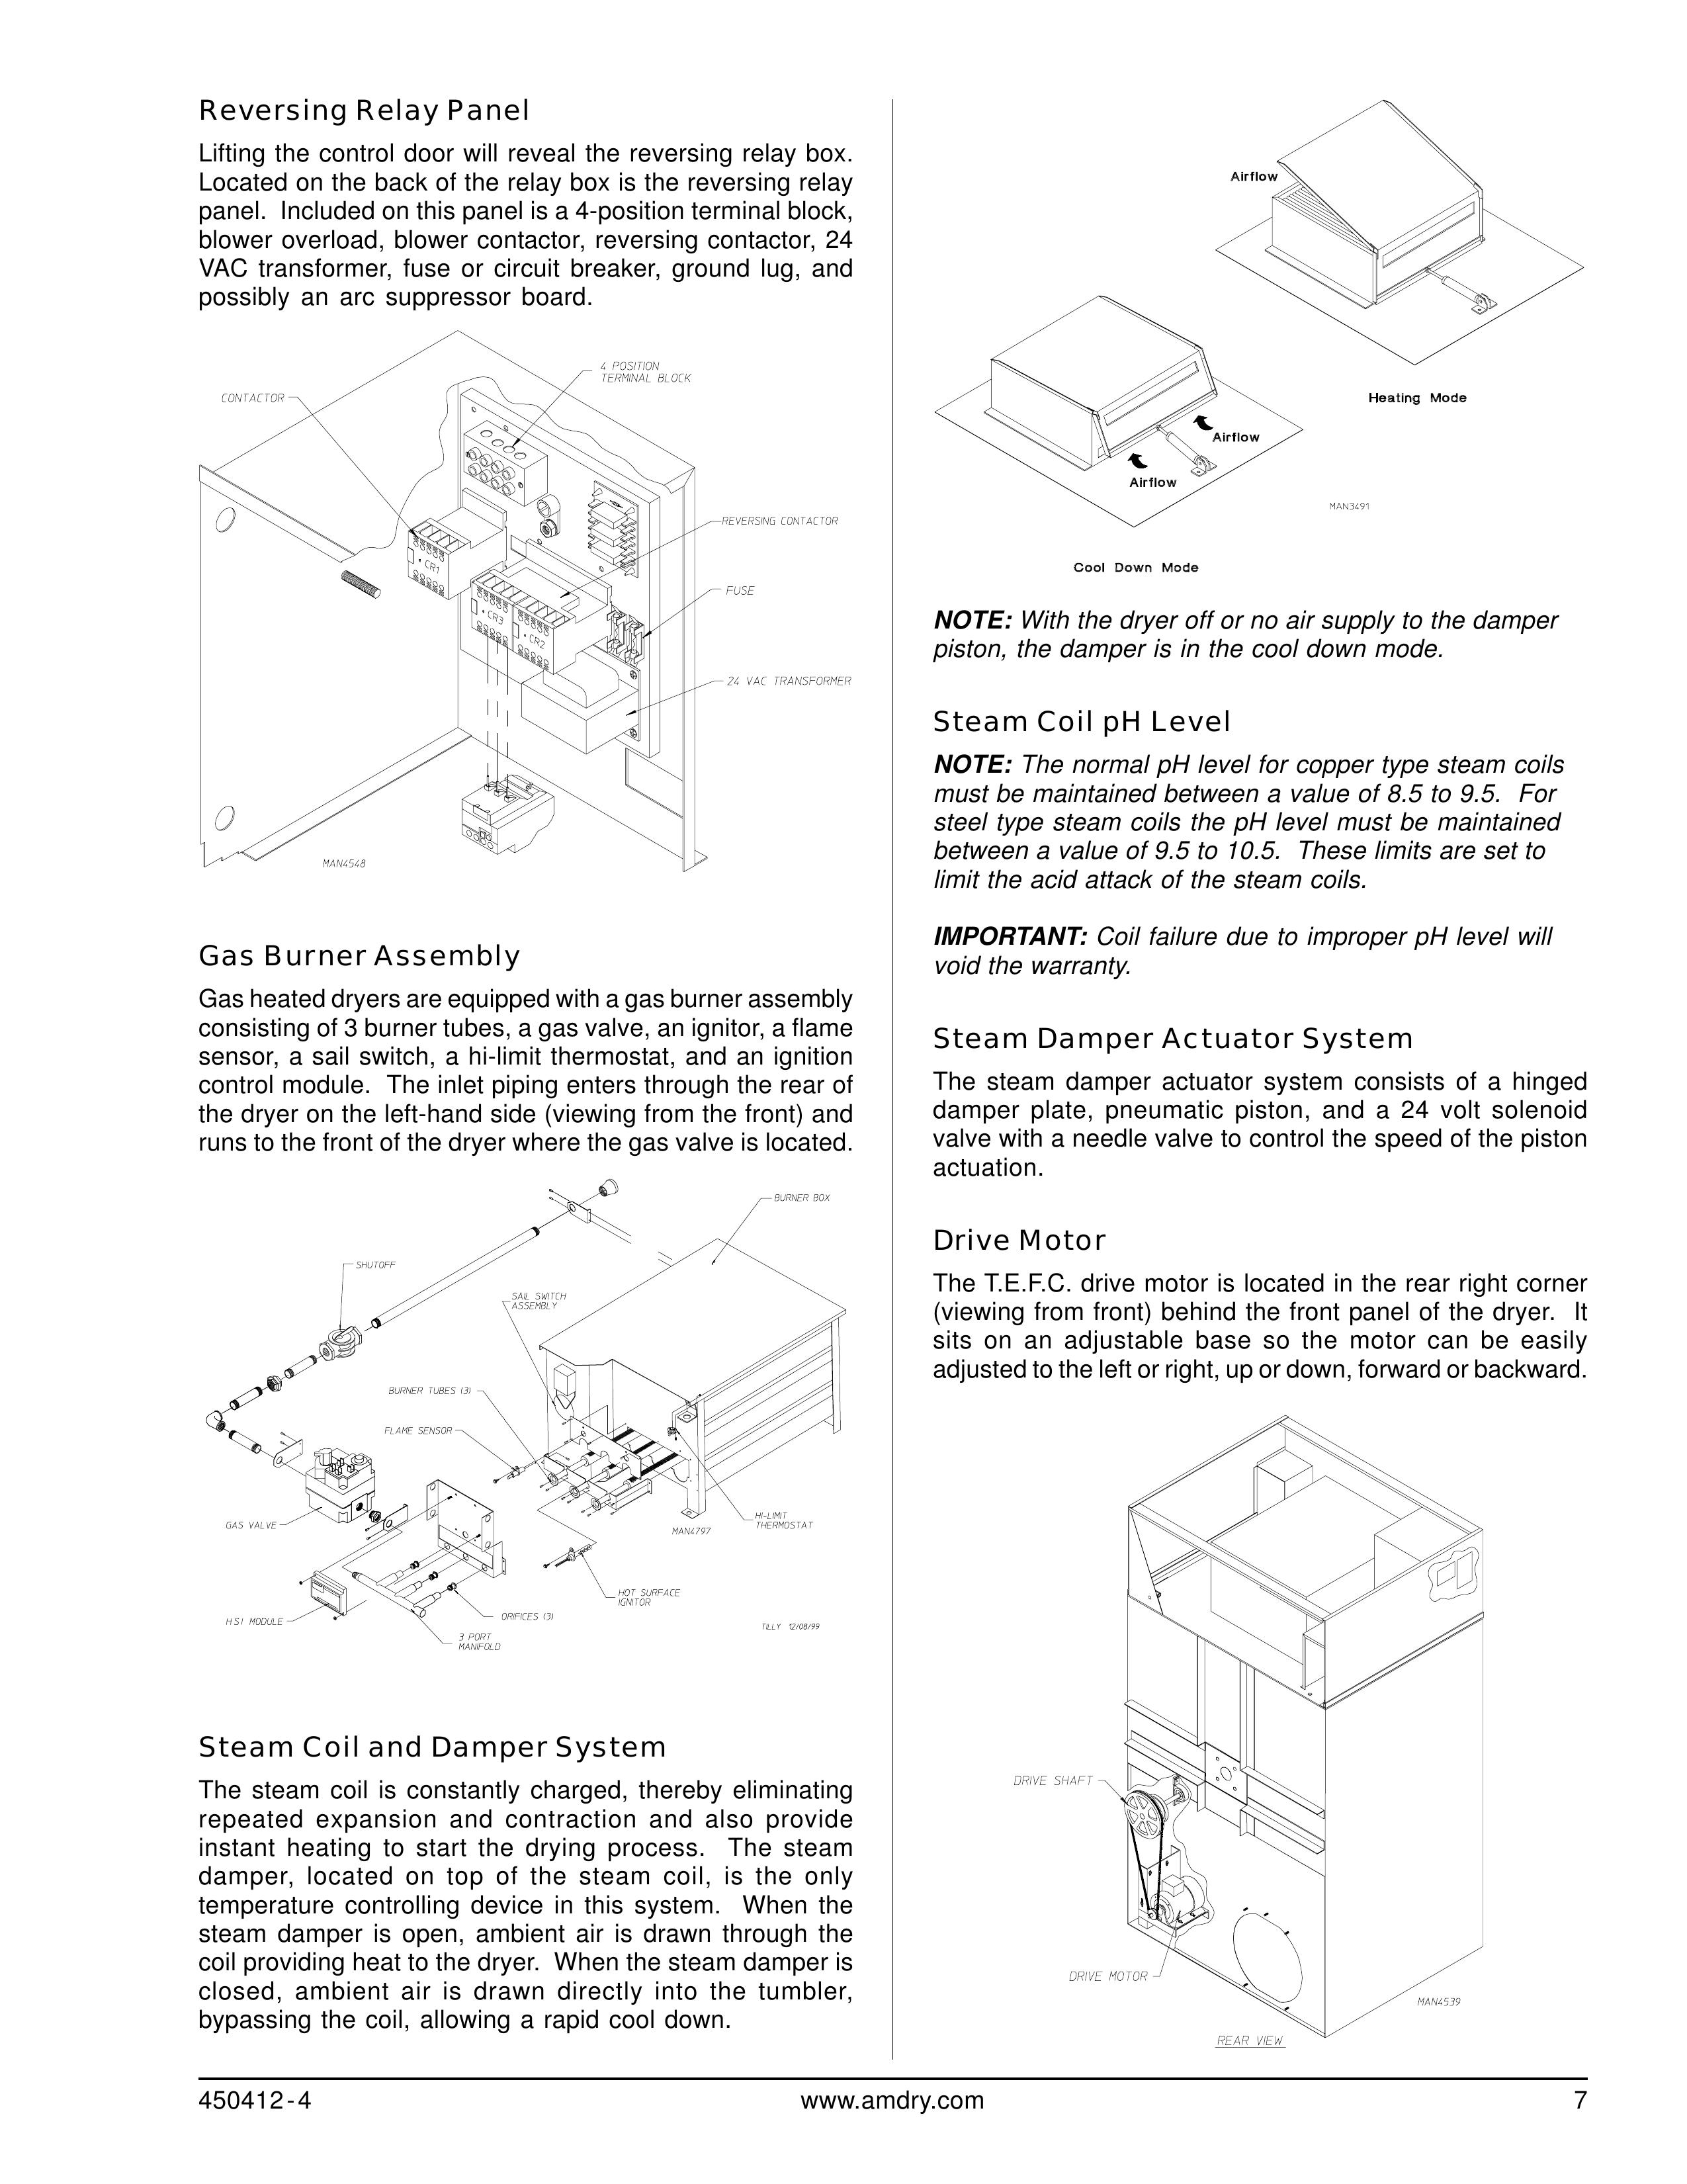 ADC ML-122 Clothes Dryer User Manual (Page 7)